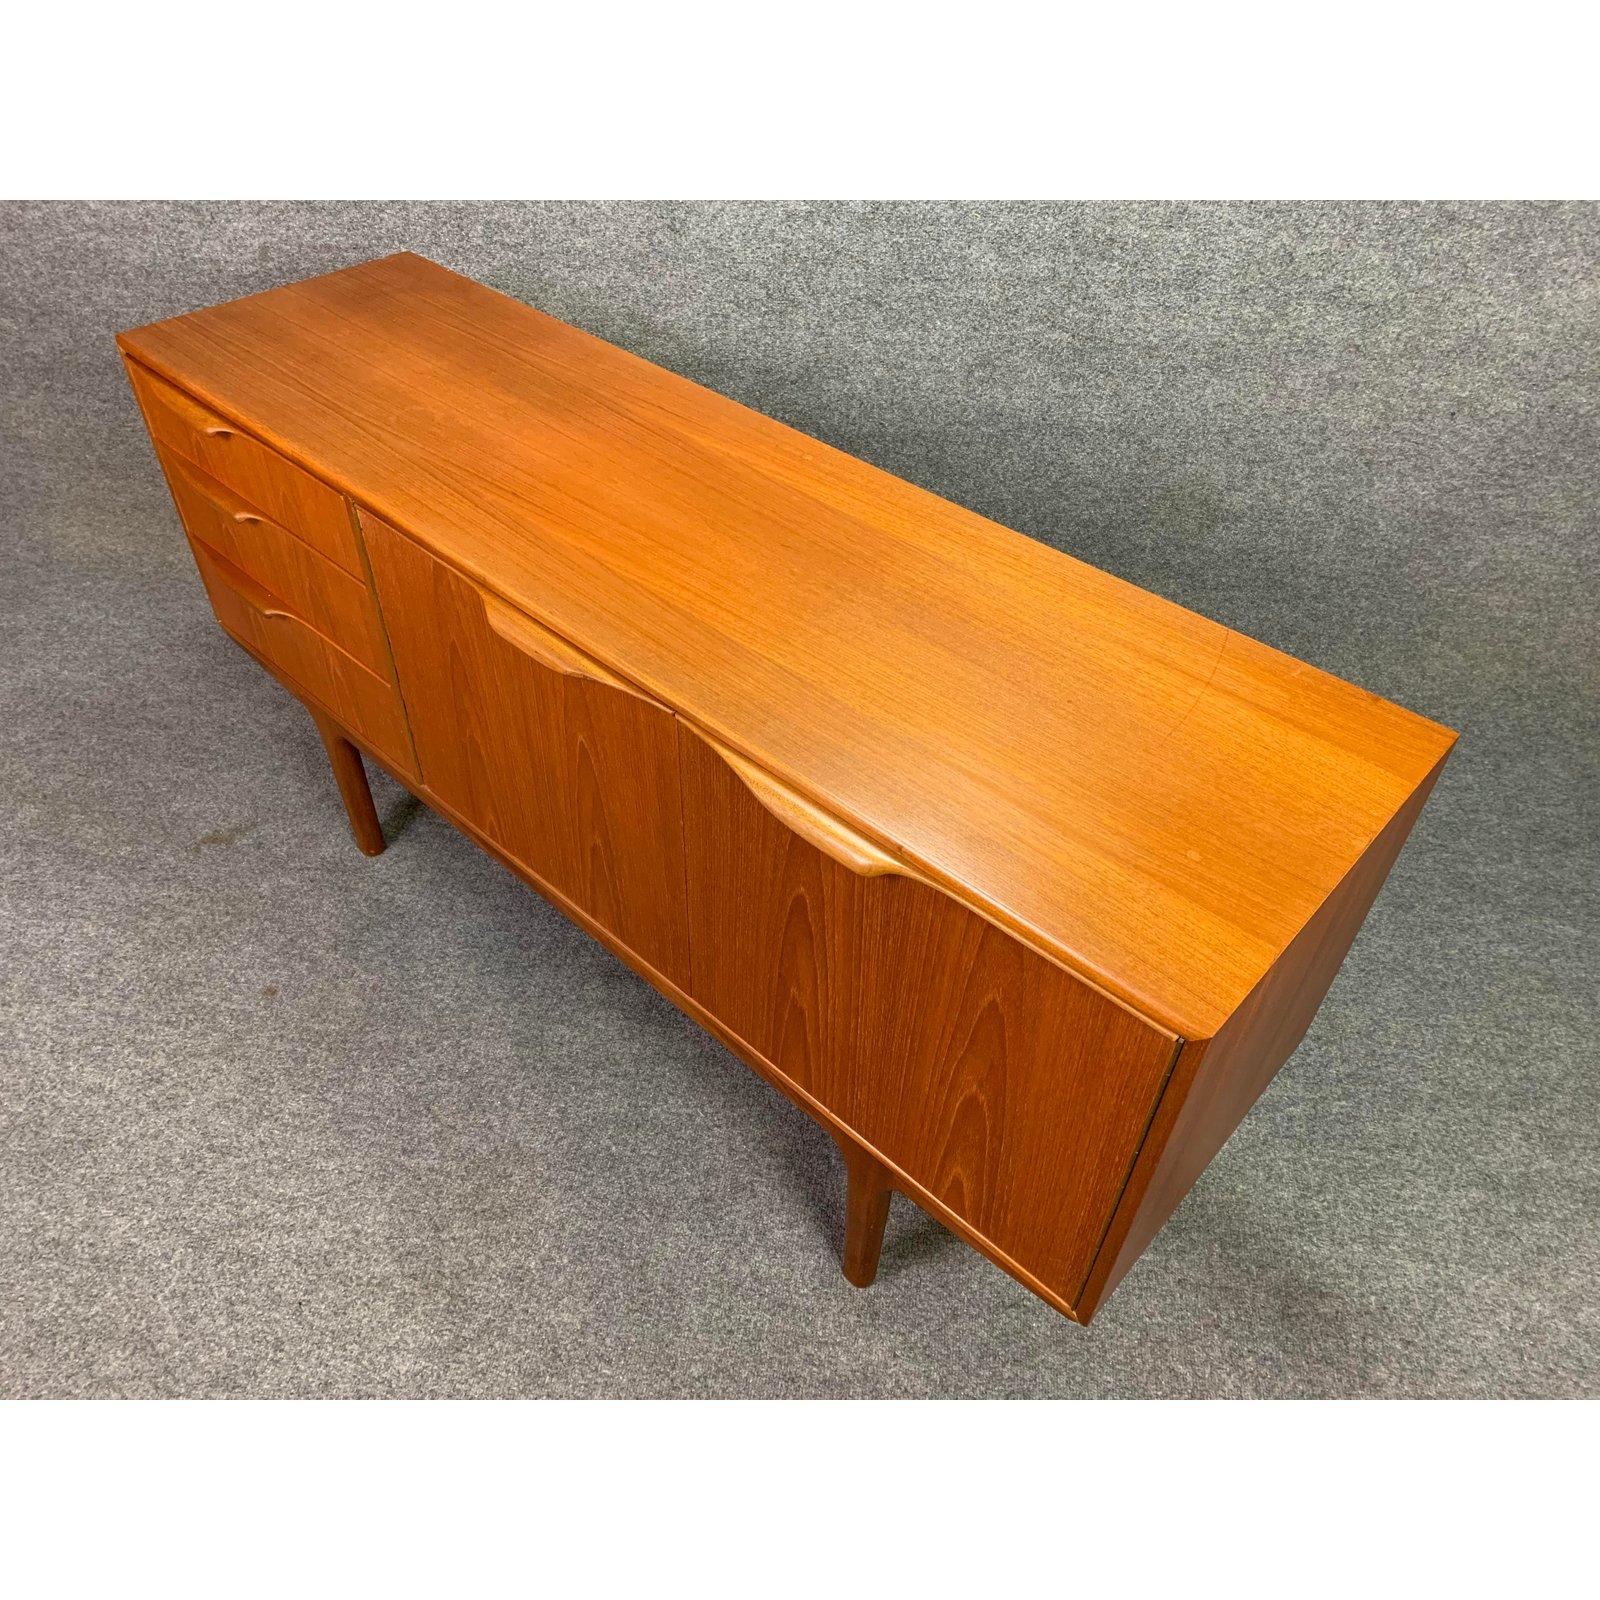 Here is a beautiful British mid century modern compact credenza model 